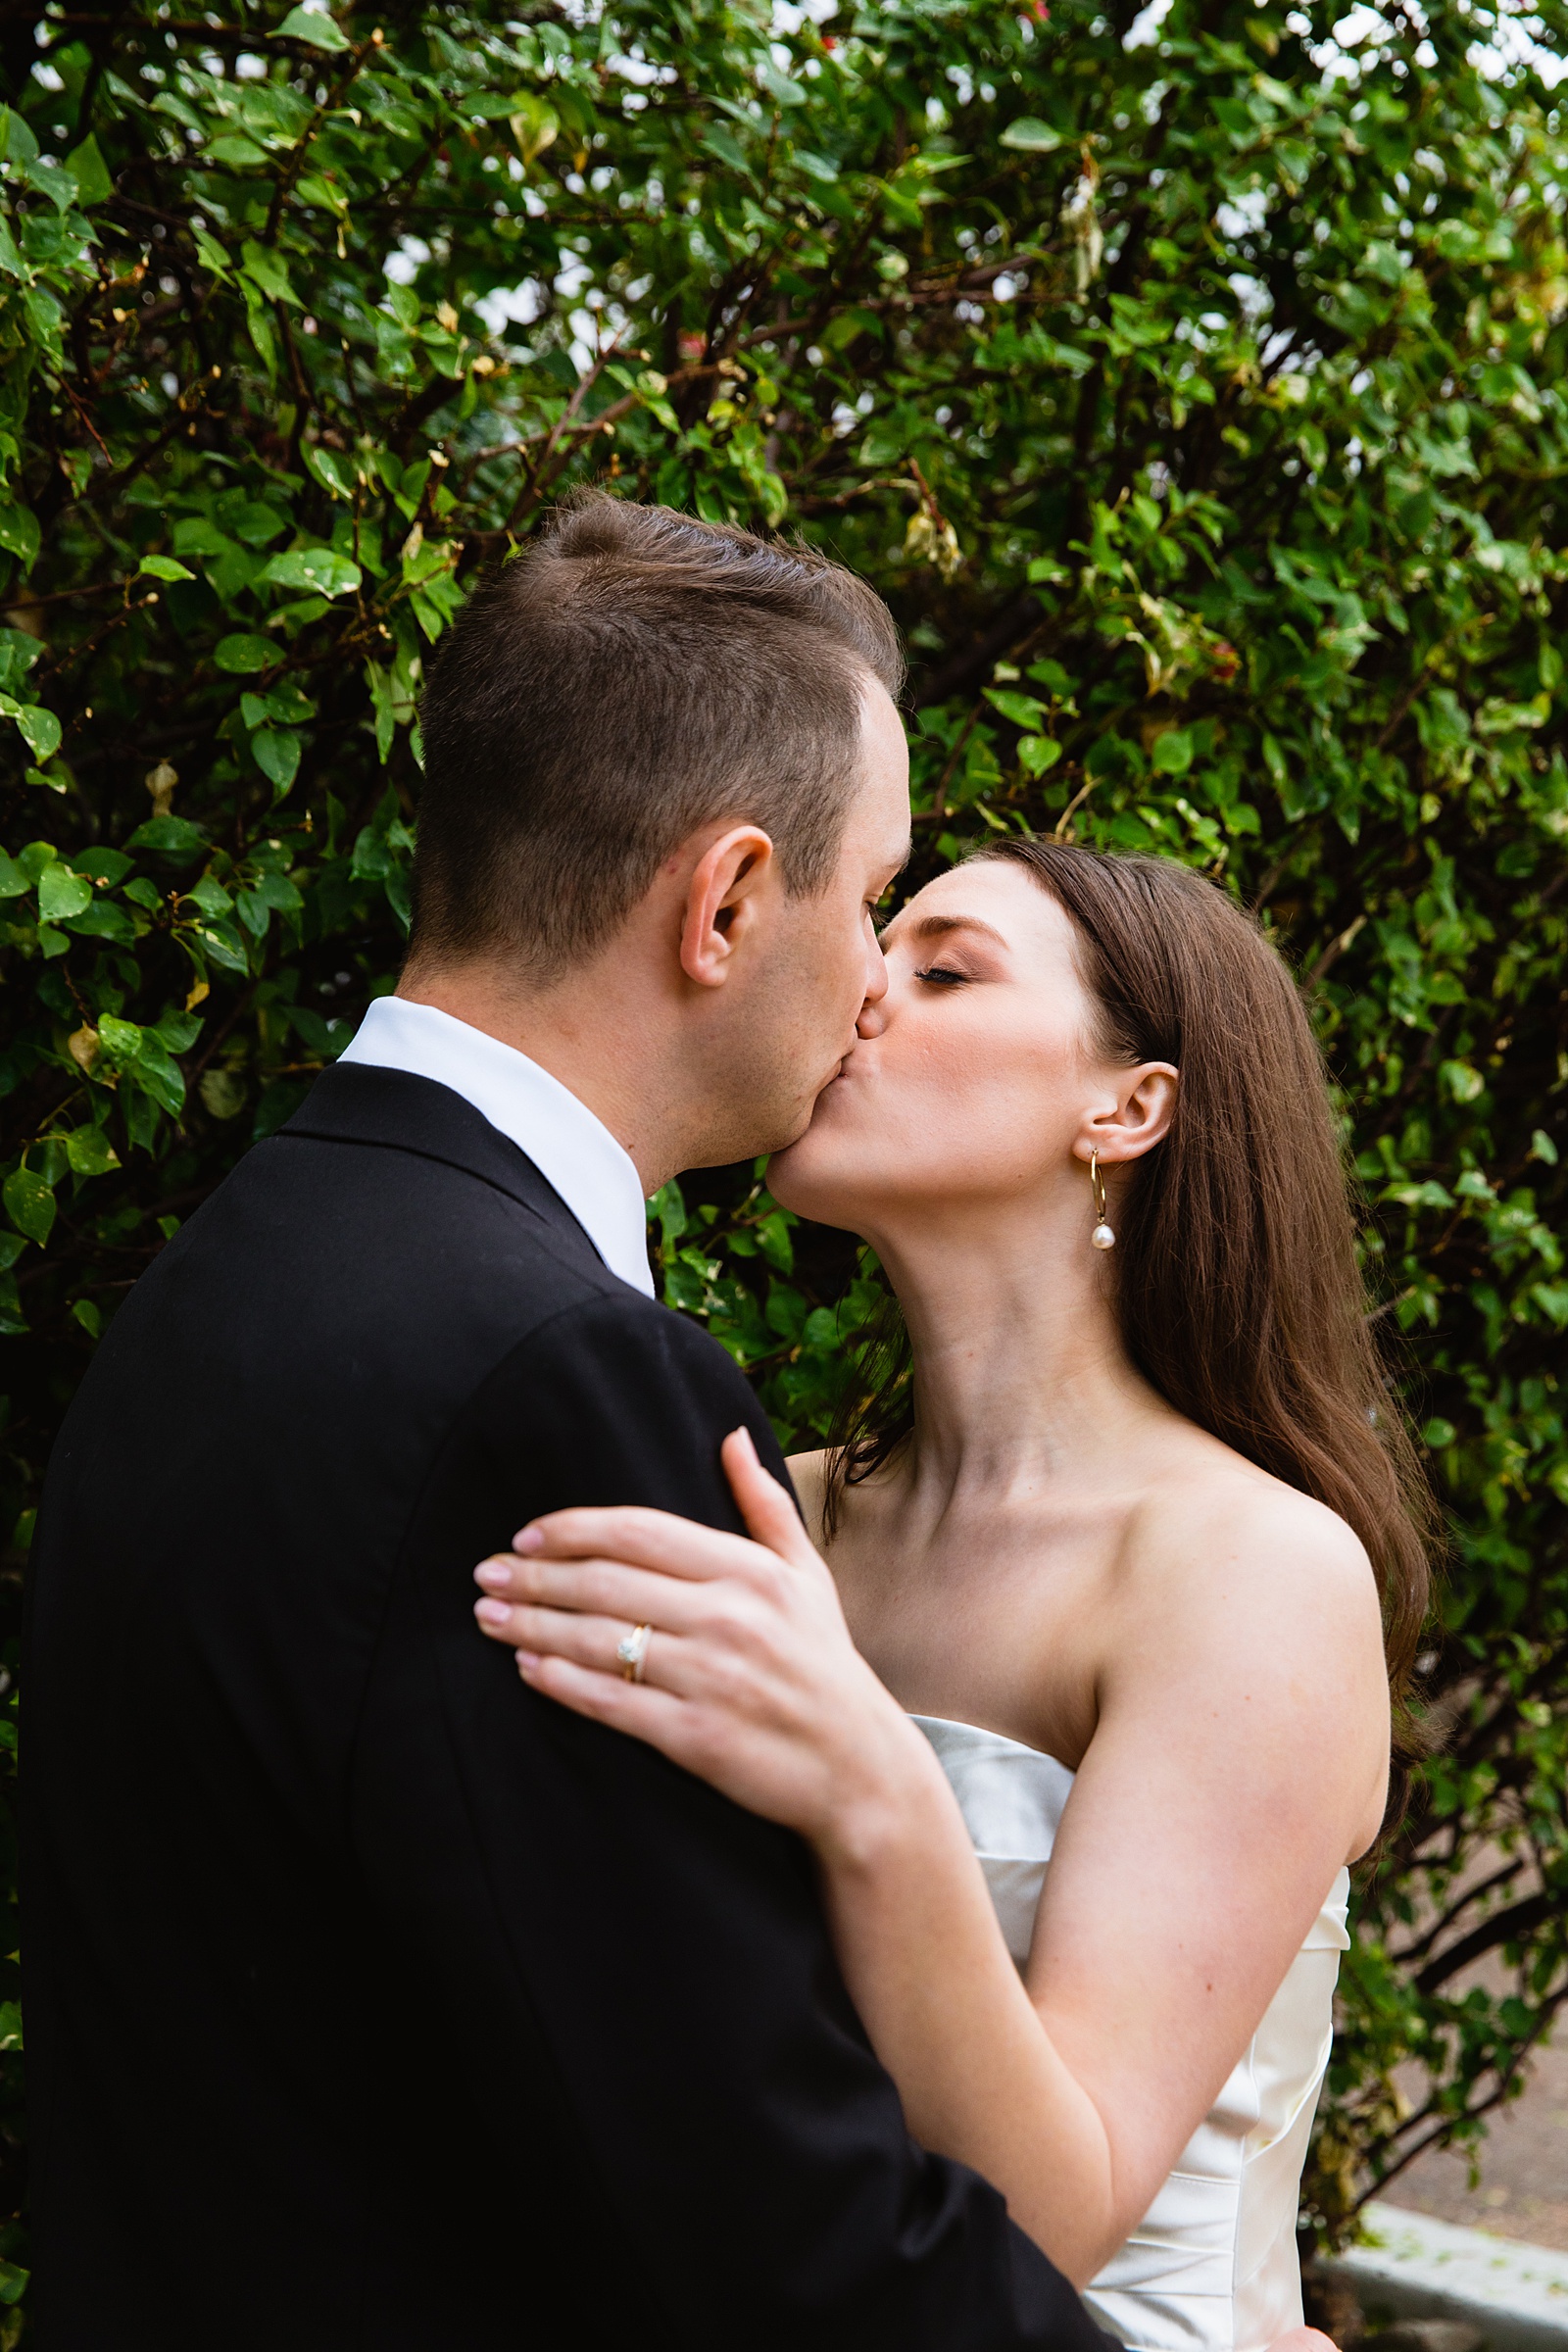 Bride & Groom share a kiss during their The Scott wedding by Scottsdale wedding photographer PMA Photography.